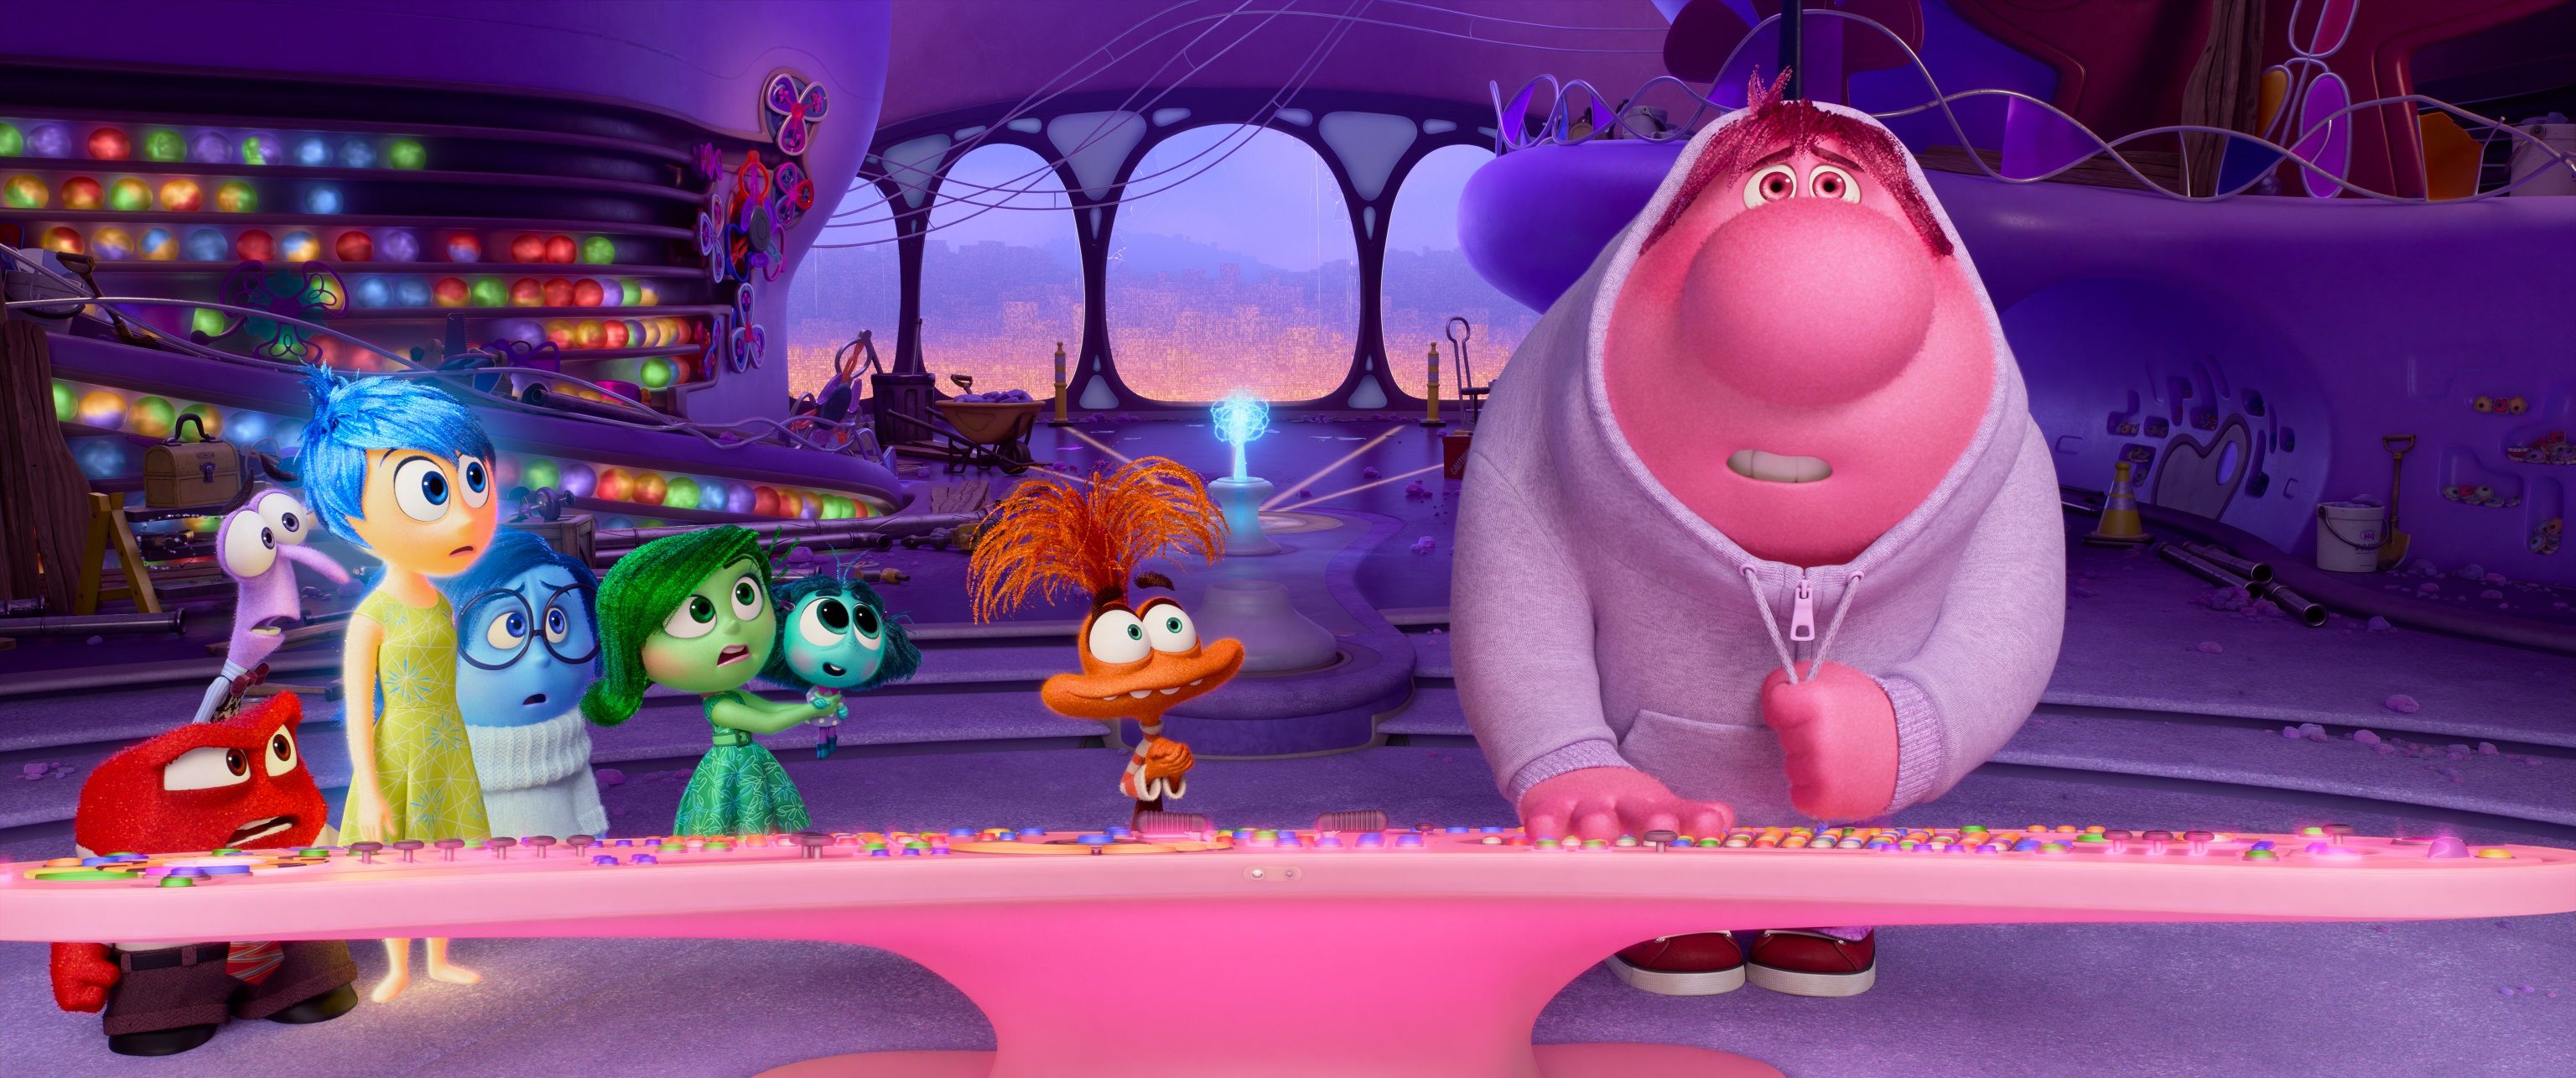 The Pair And Partner Of Every New And Old Emotion In Inside Out 2! 